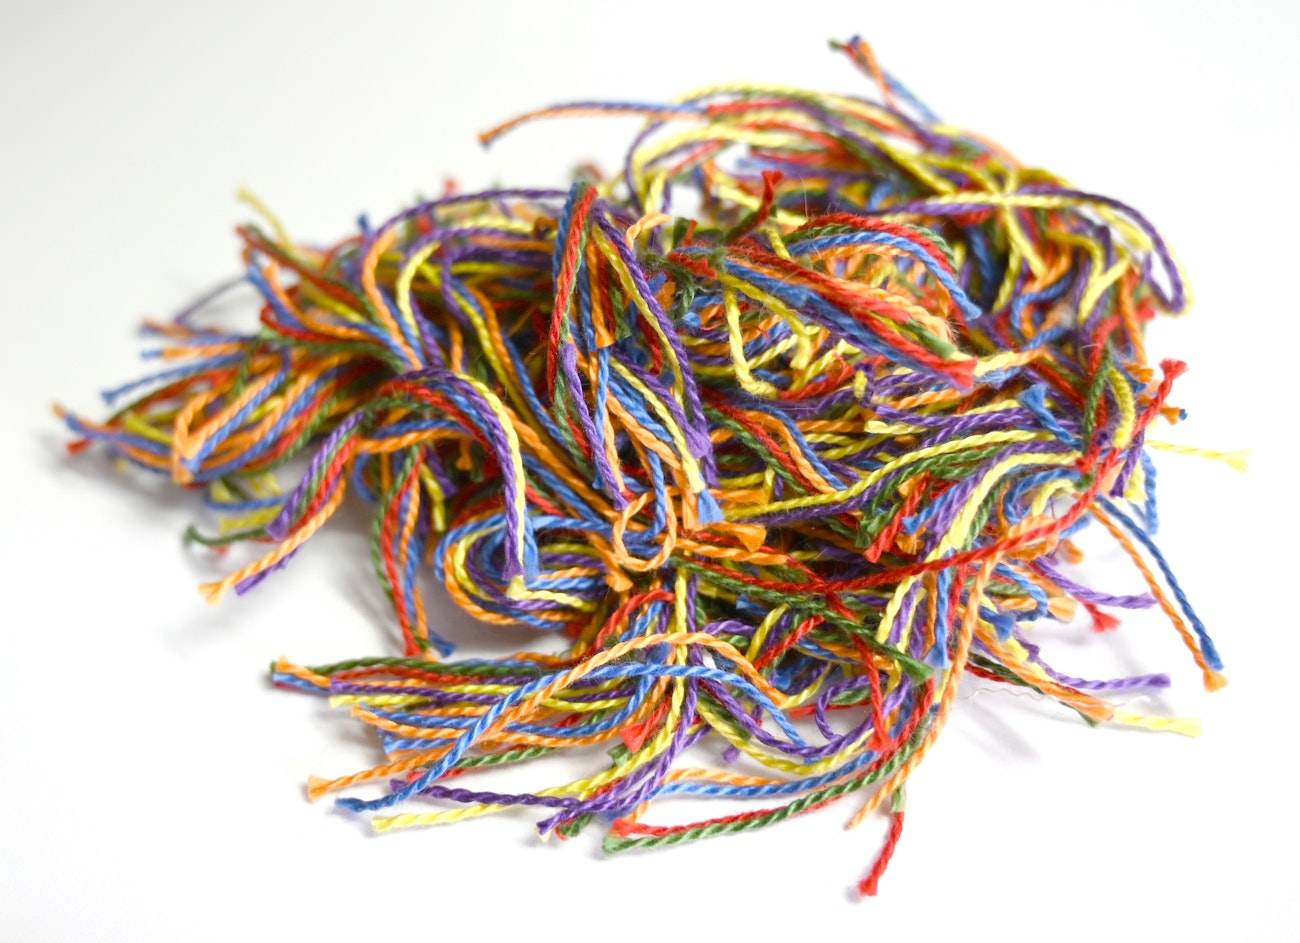 A pile of colorful trimmed threads